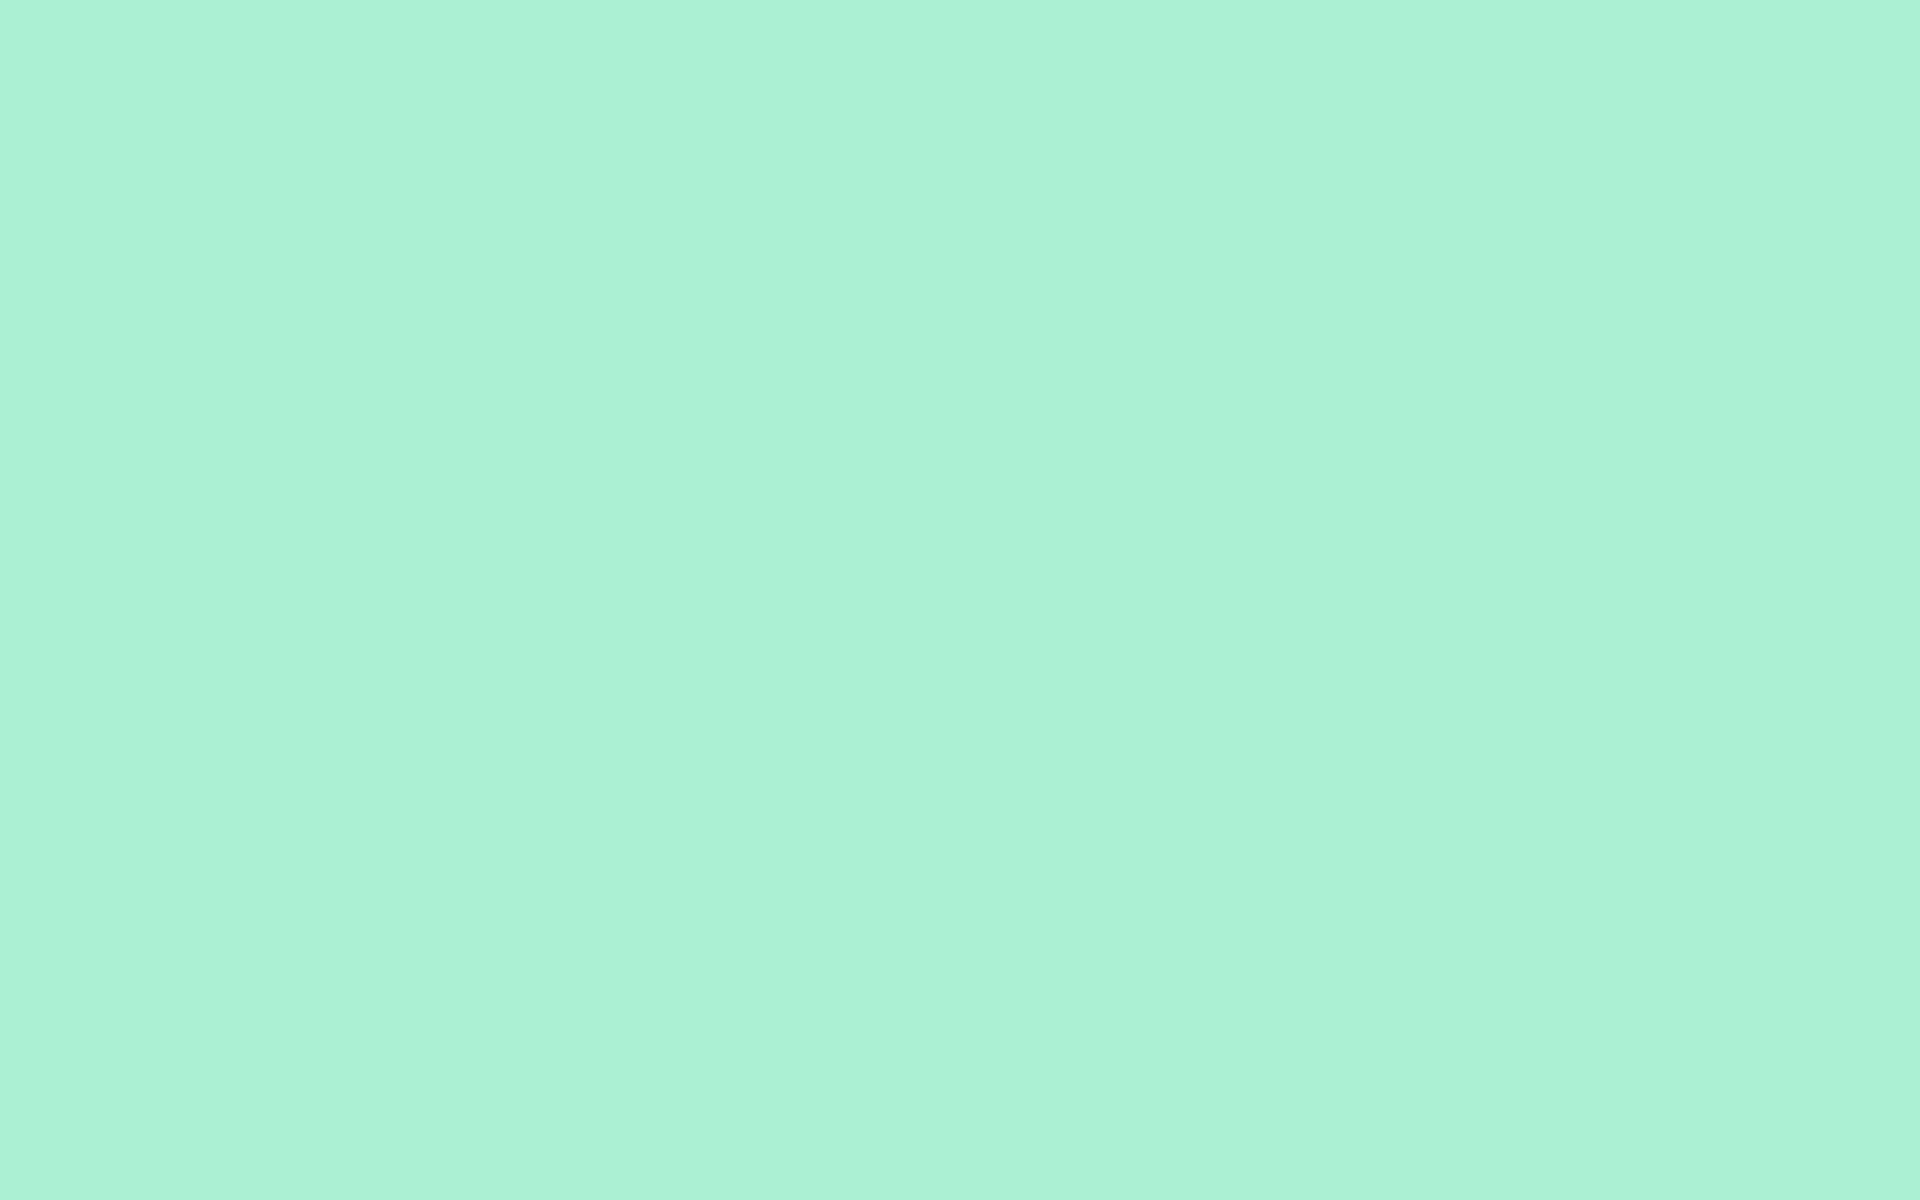 Solid Pastel Light Green Background